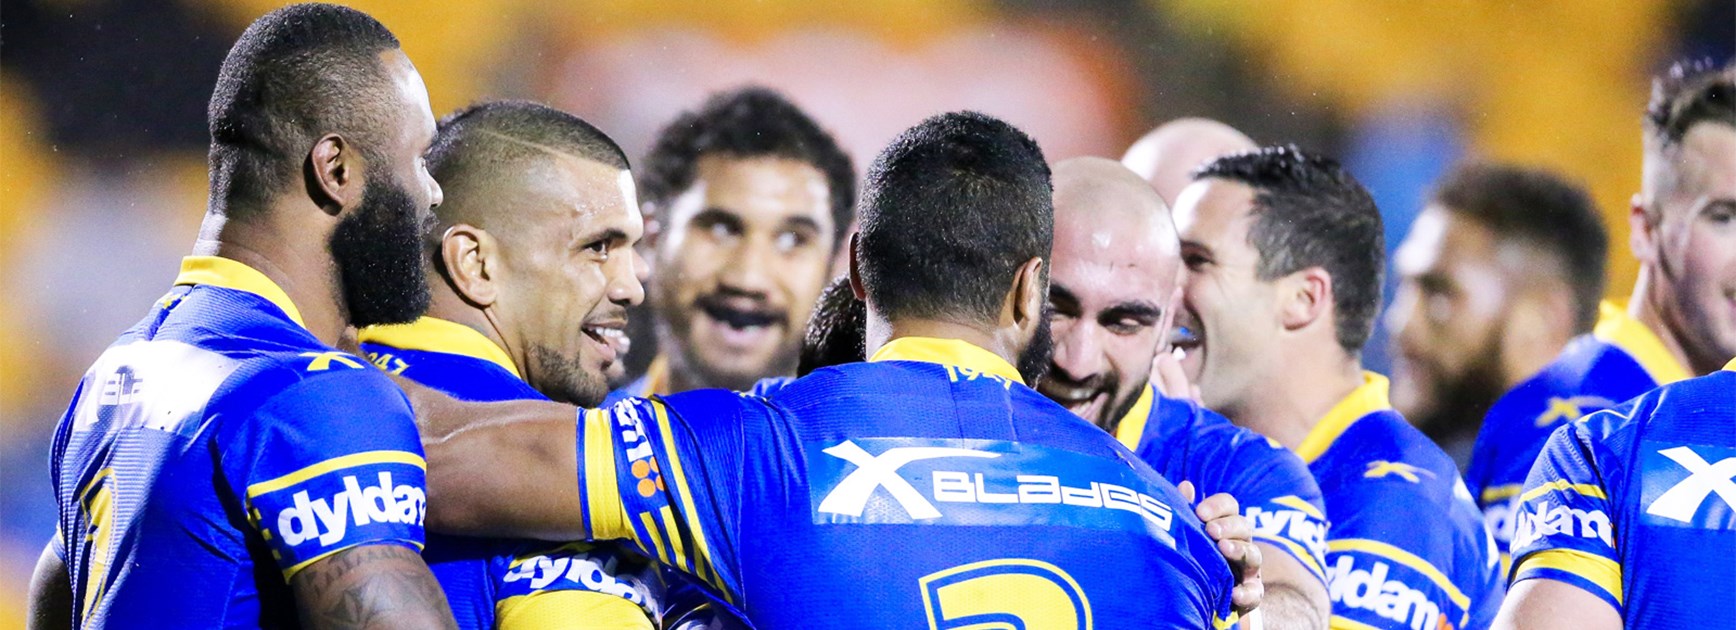 The Eels celebrate a try against the Warriors in Round 26.